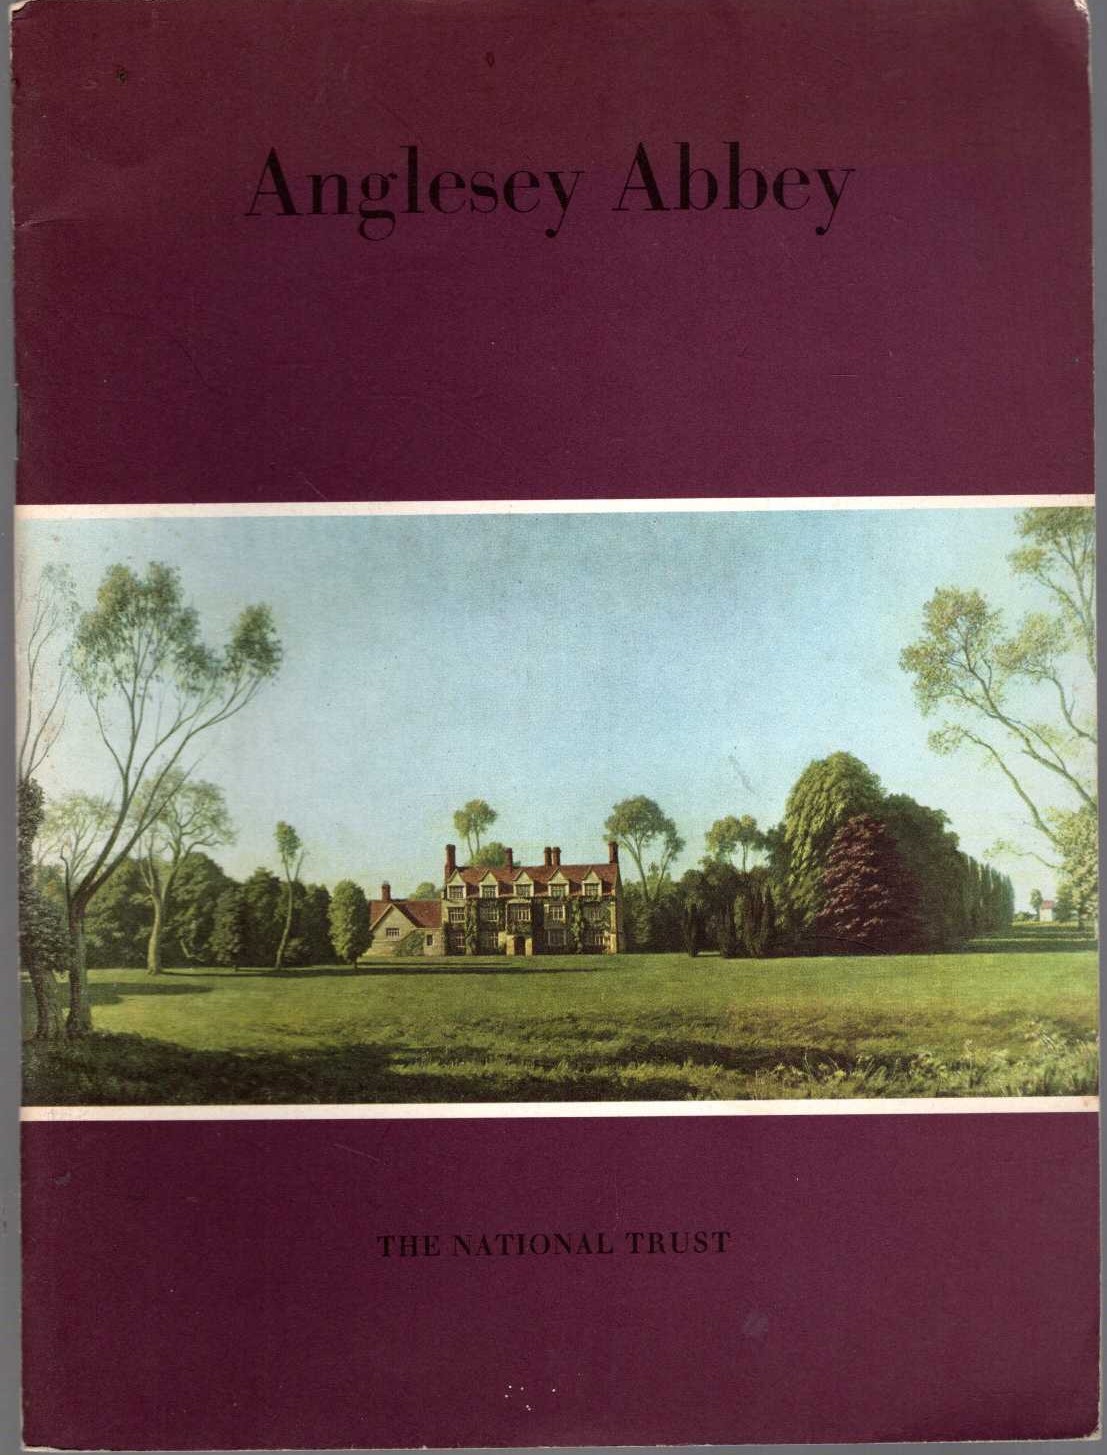 
\ ANGLESEY ABBEY by Robin Fedden front book cover image